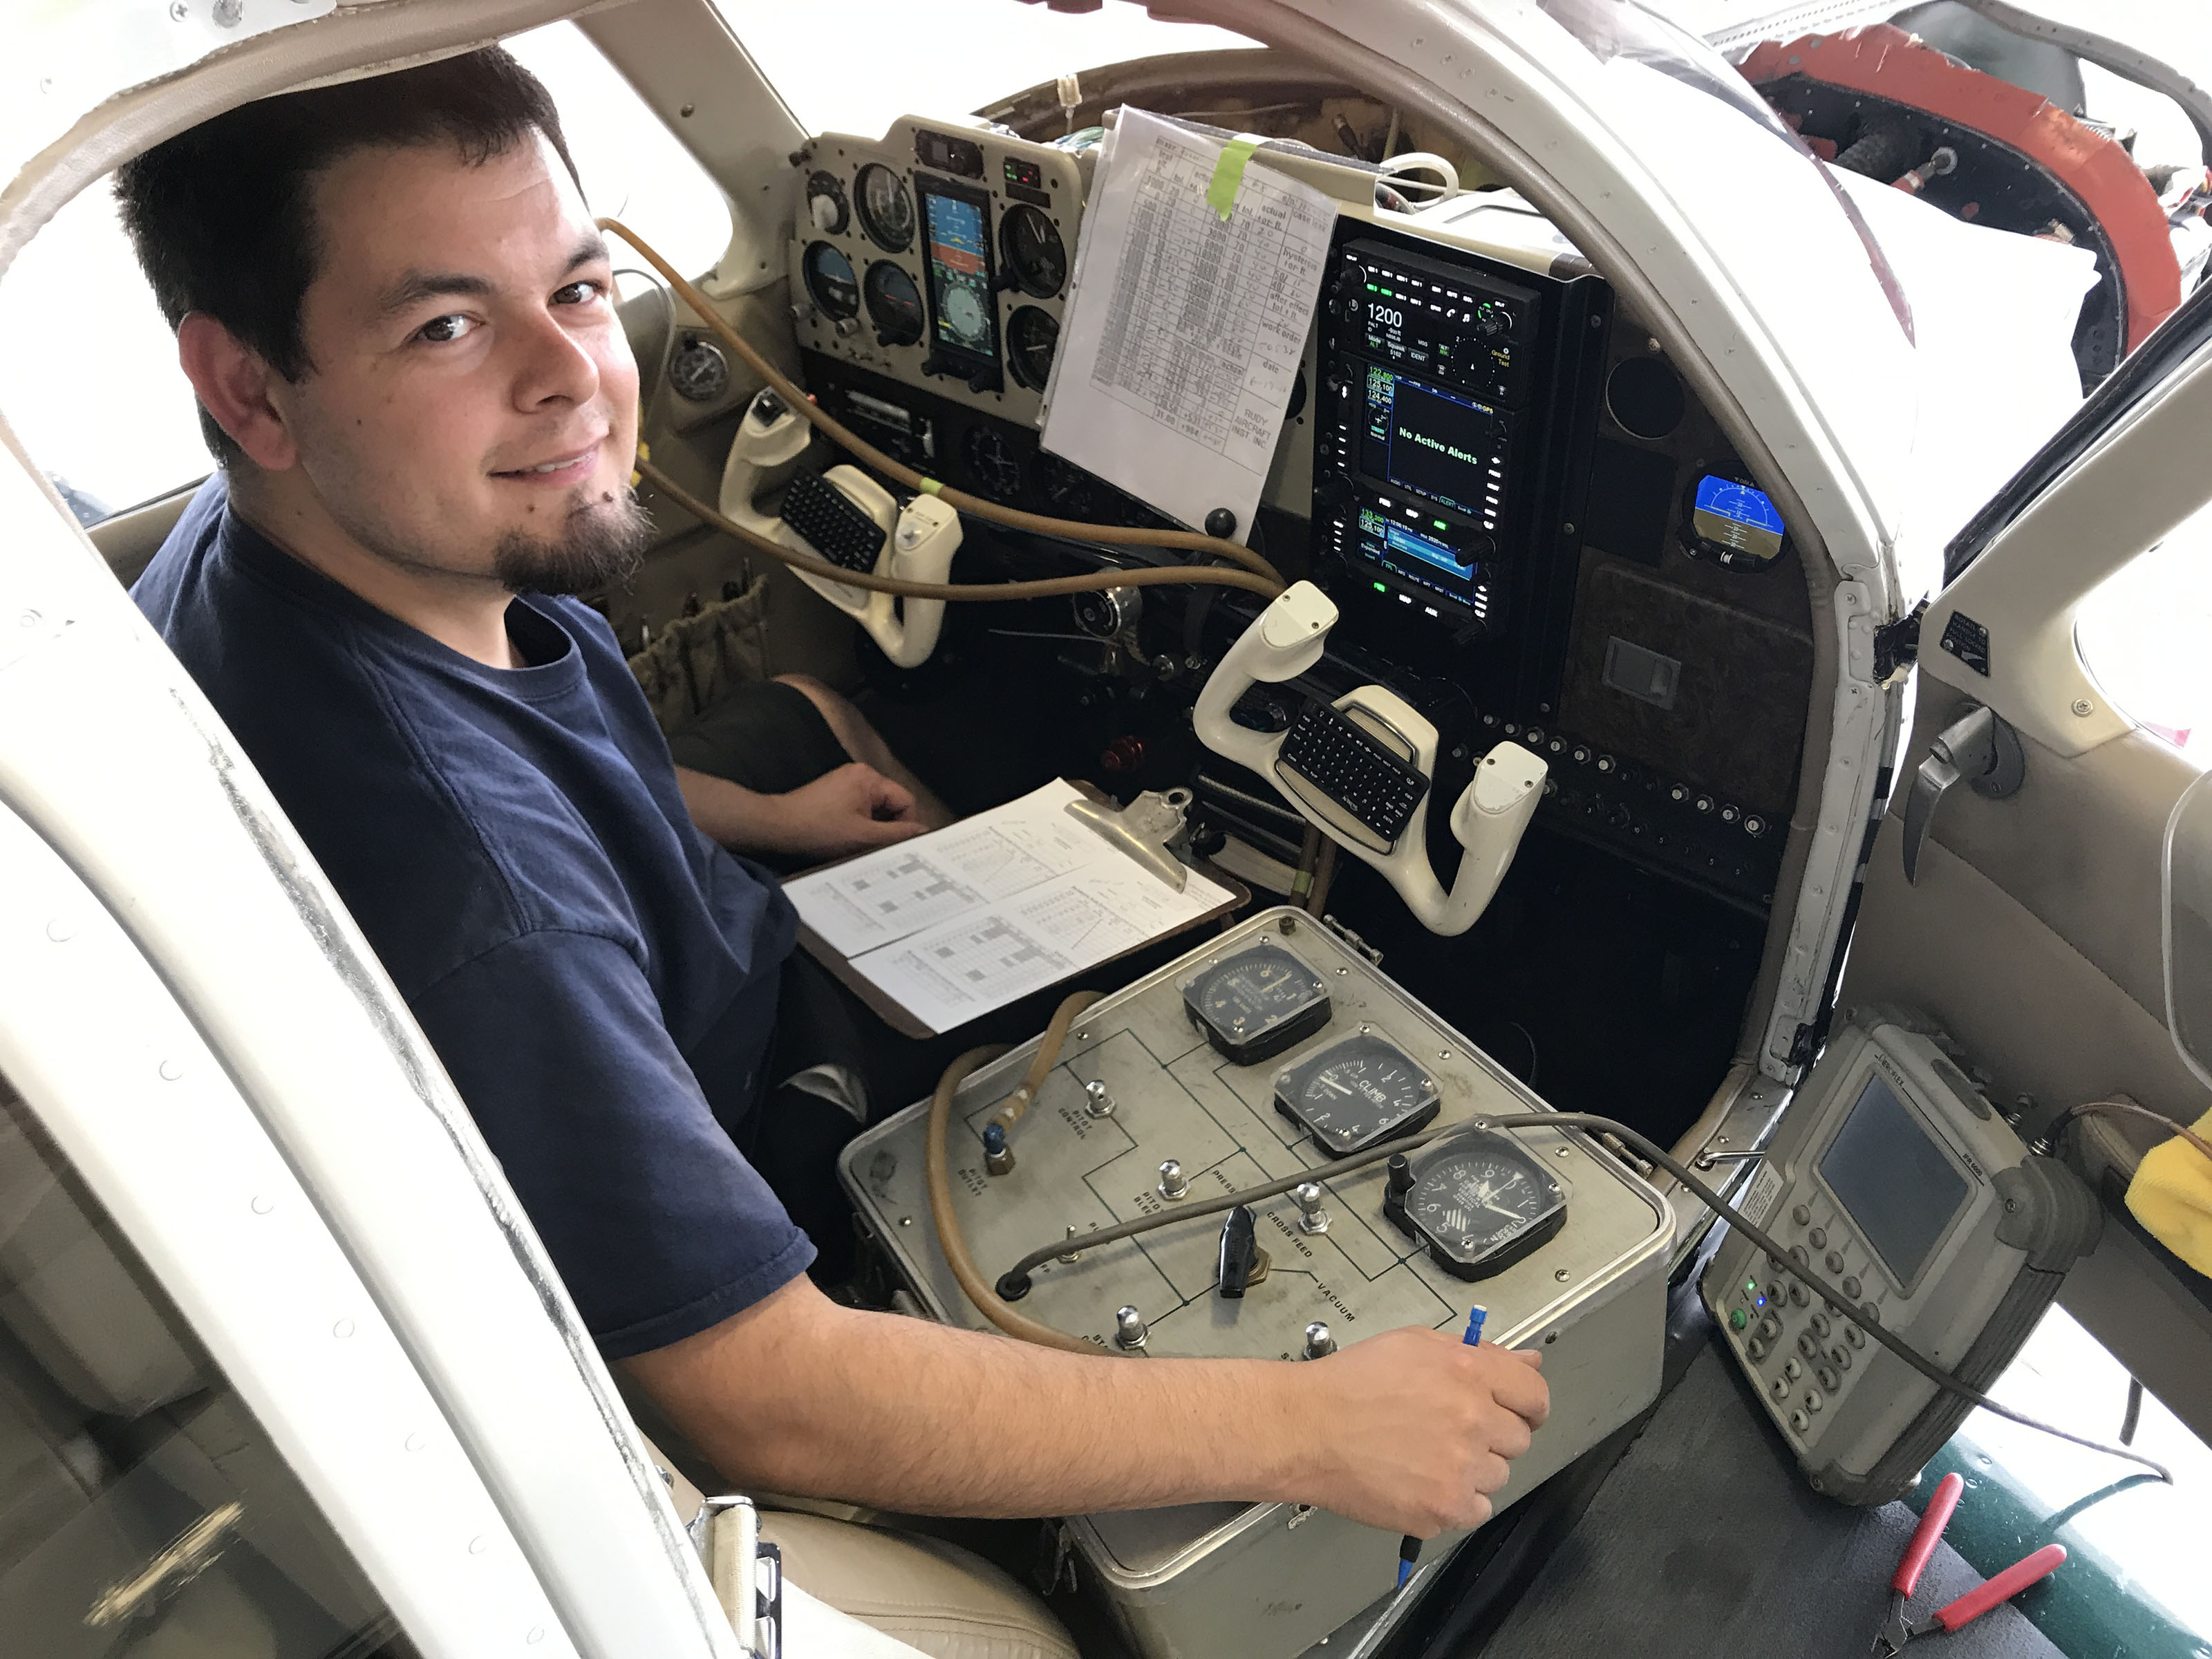 Rafael Tomai performing the transponder and altimeter certification tests at Infinity Aviation in Nashua, New Hampshire. Photo courtesy of Jeff Simon.